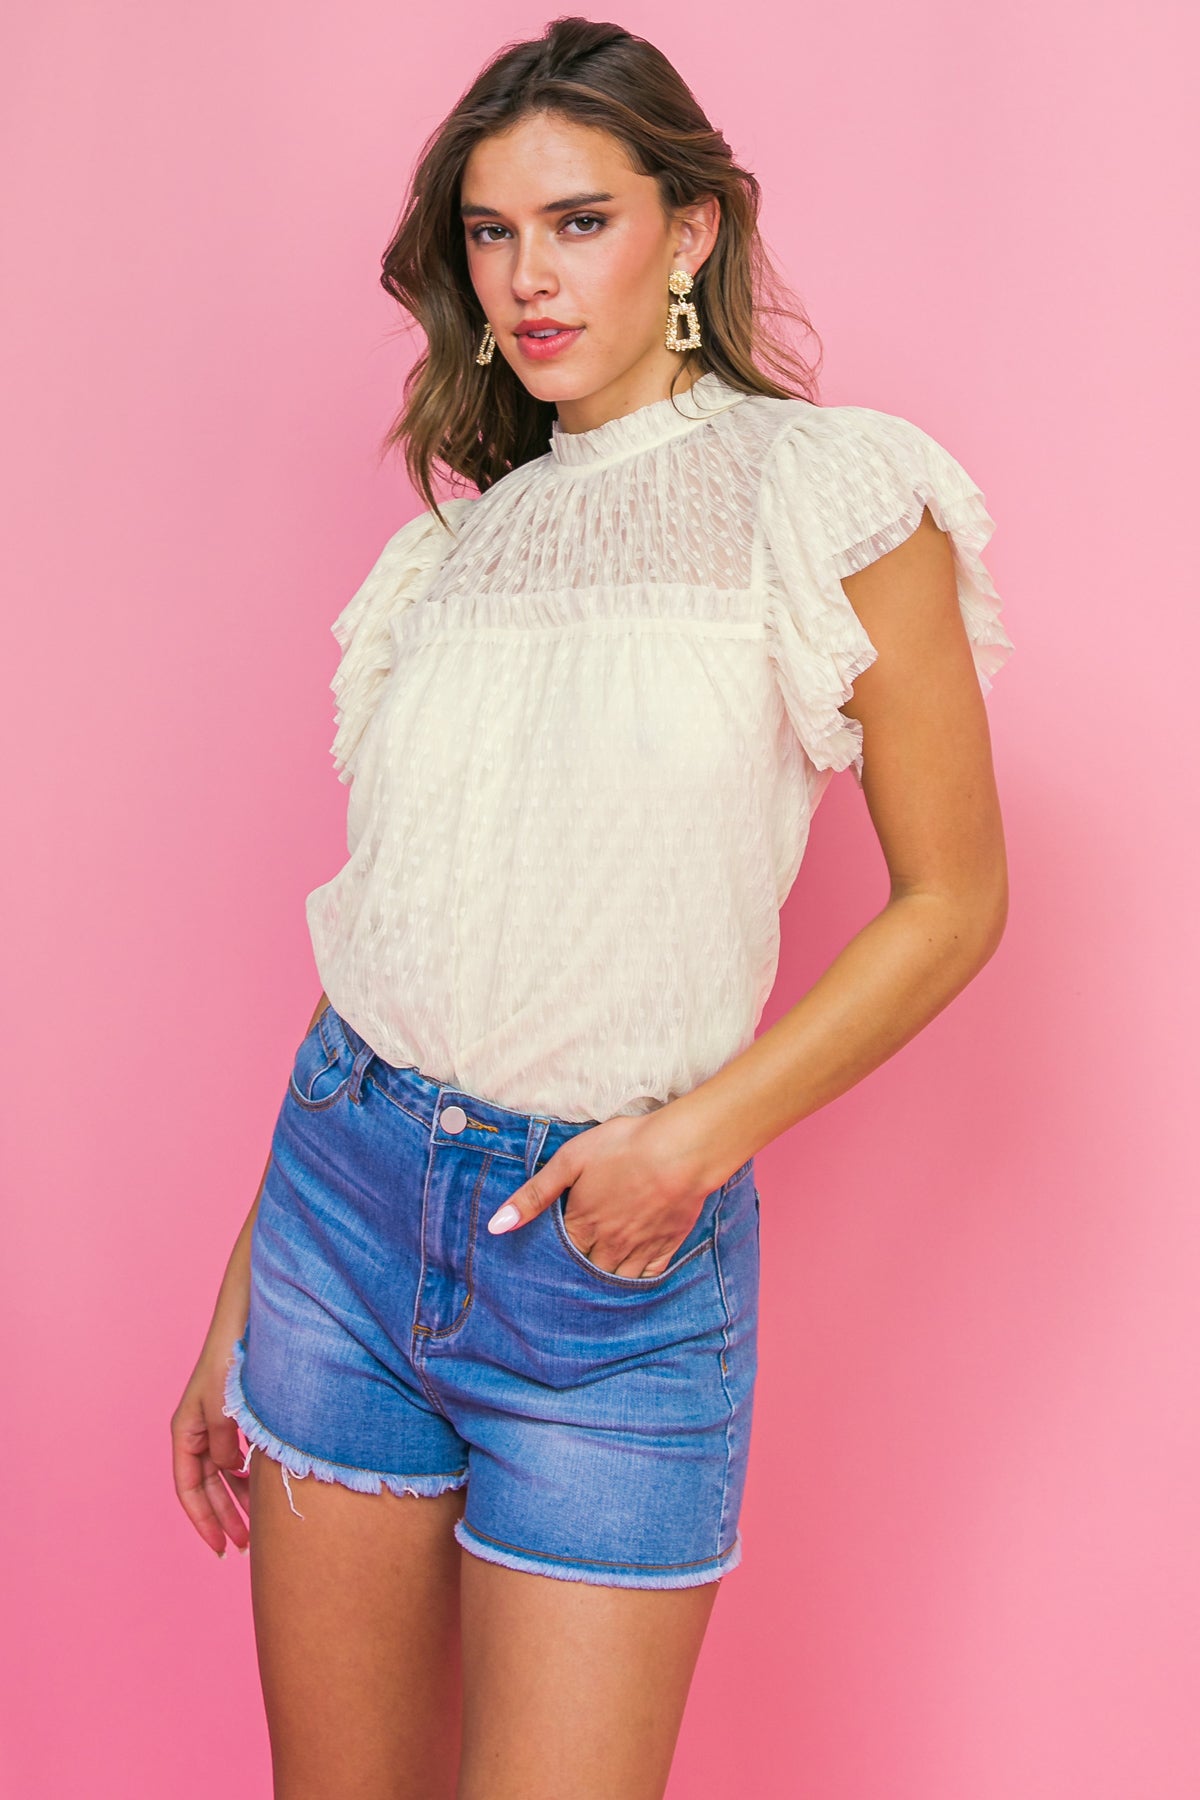 UNDENIABLE SHINE WOVEN LACE TOP